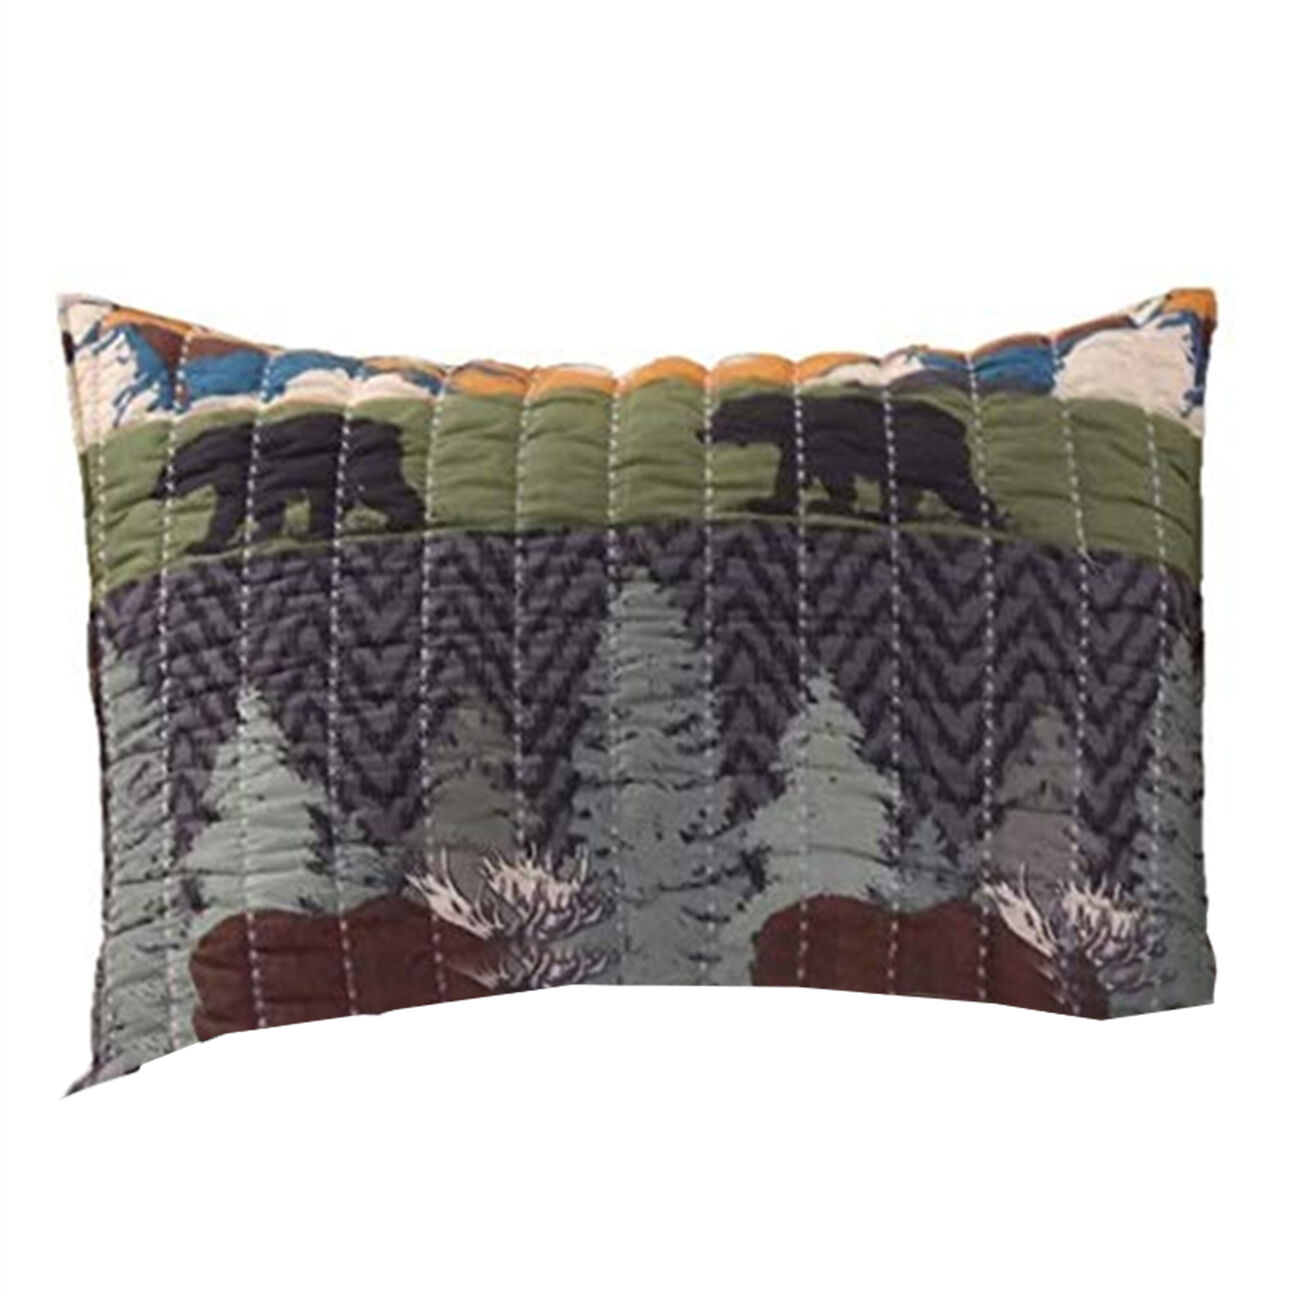 3 Piece King Size Quilt Set with Nature Inspired Print, Multicolor